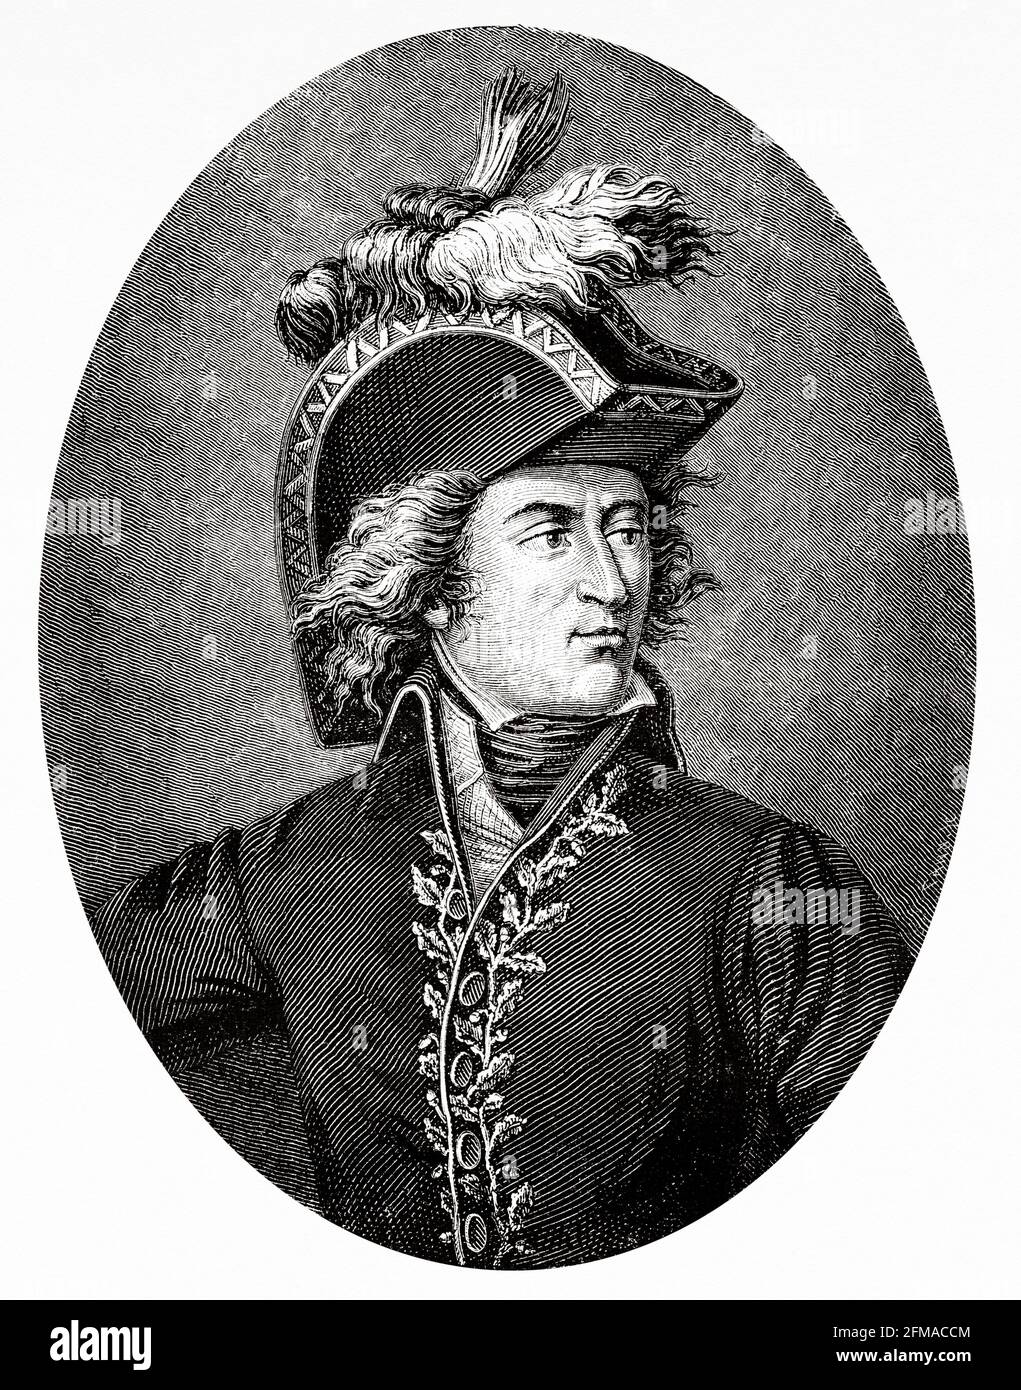 Portrait of Guillaume Marie-Anne Brune (1764-1815) 1st Count Brune,  was a French military commander, Marshal of the Empire, and political figure who served during the French Revolutionary Wars and the Napoleonic Wars. France. Old 19th century engraved illustration from Histoire de la Revolution Francaise 1876 by Jules Michelet (1798-1874) Stock Photo